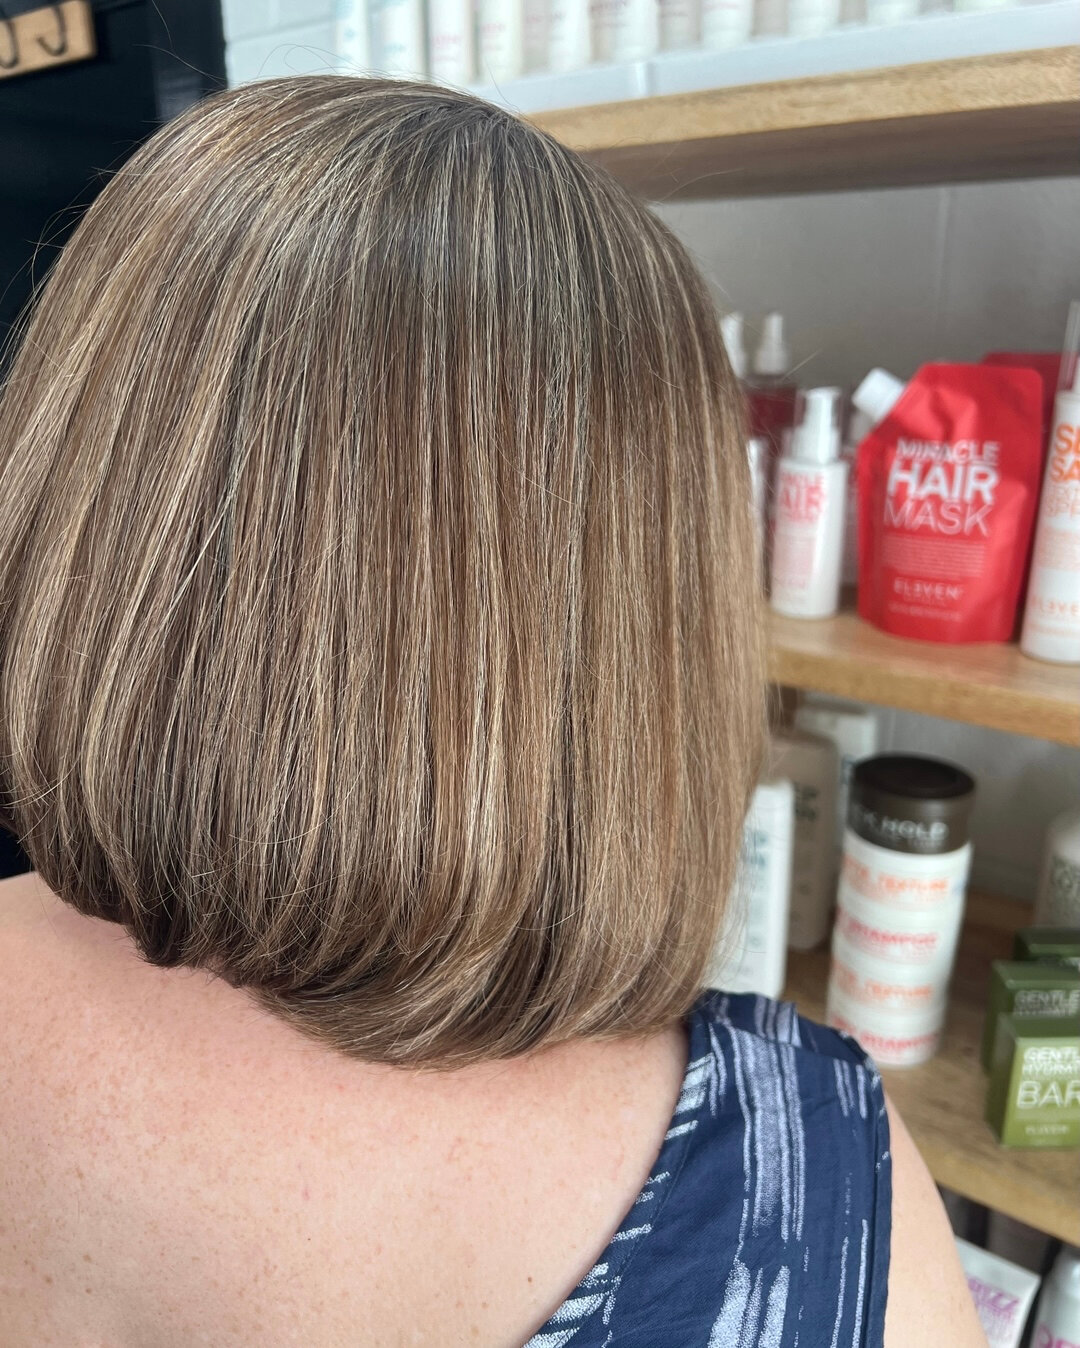 Wanting a change and gravitating towards a sleek, shorter haircut? ​​​​​​​​​​​​​​​​
This is your sign 🙌🏻​​​​​​​​​​​​​​​​
​​​​​​​​​​​​​​​​
Book a consult today and talk to one of our lovely stylists that can guide through a hair cut that will best s